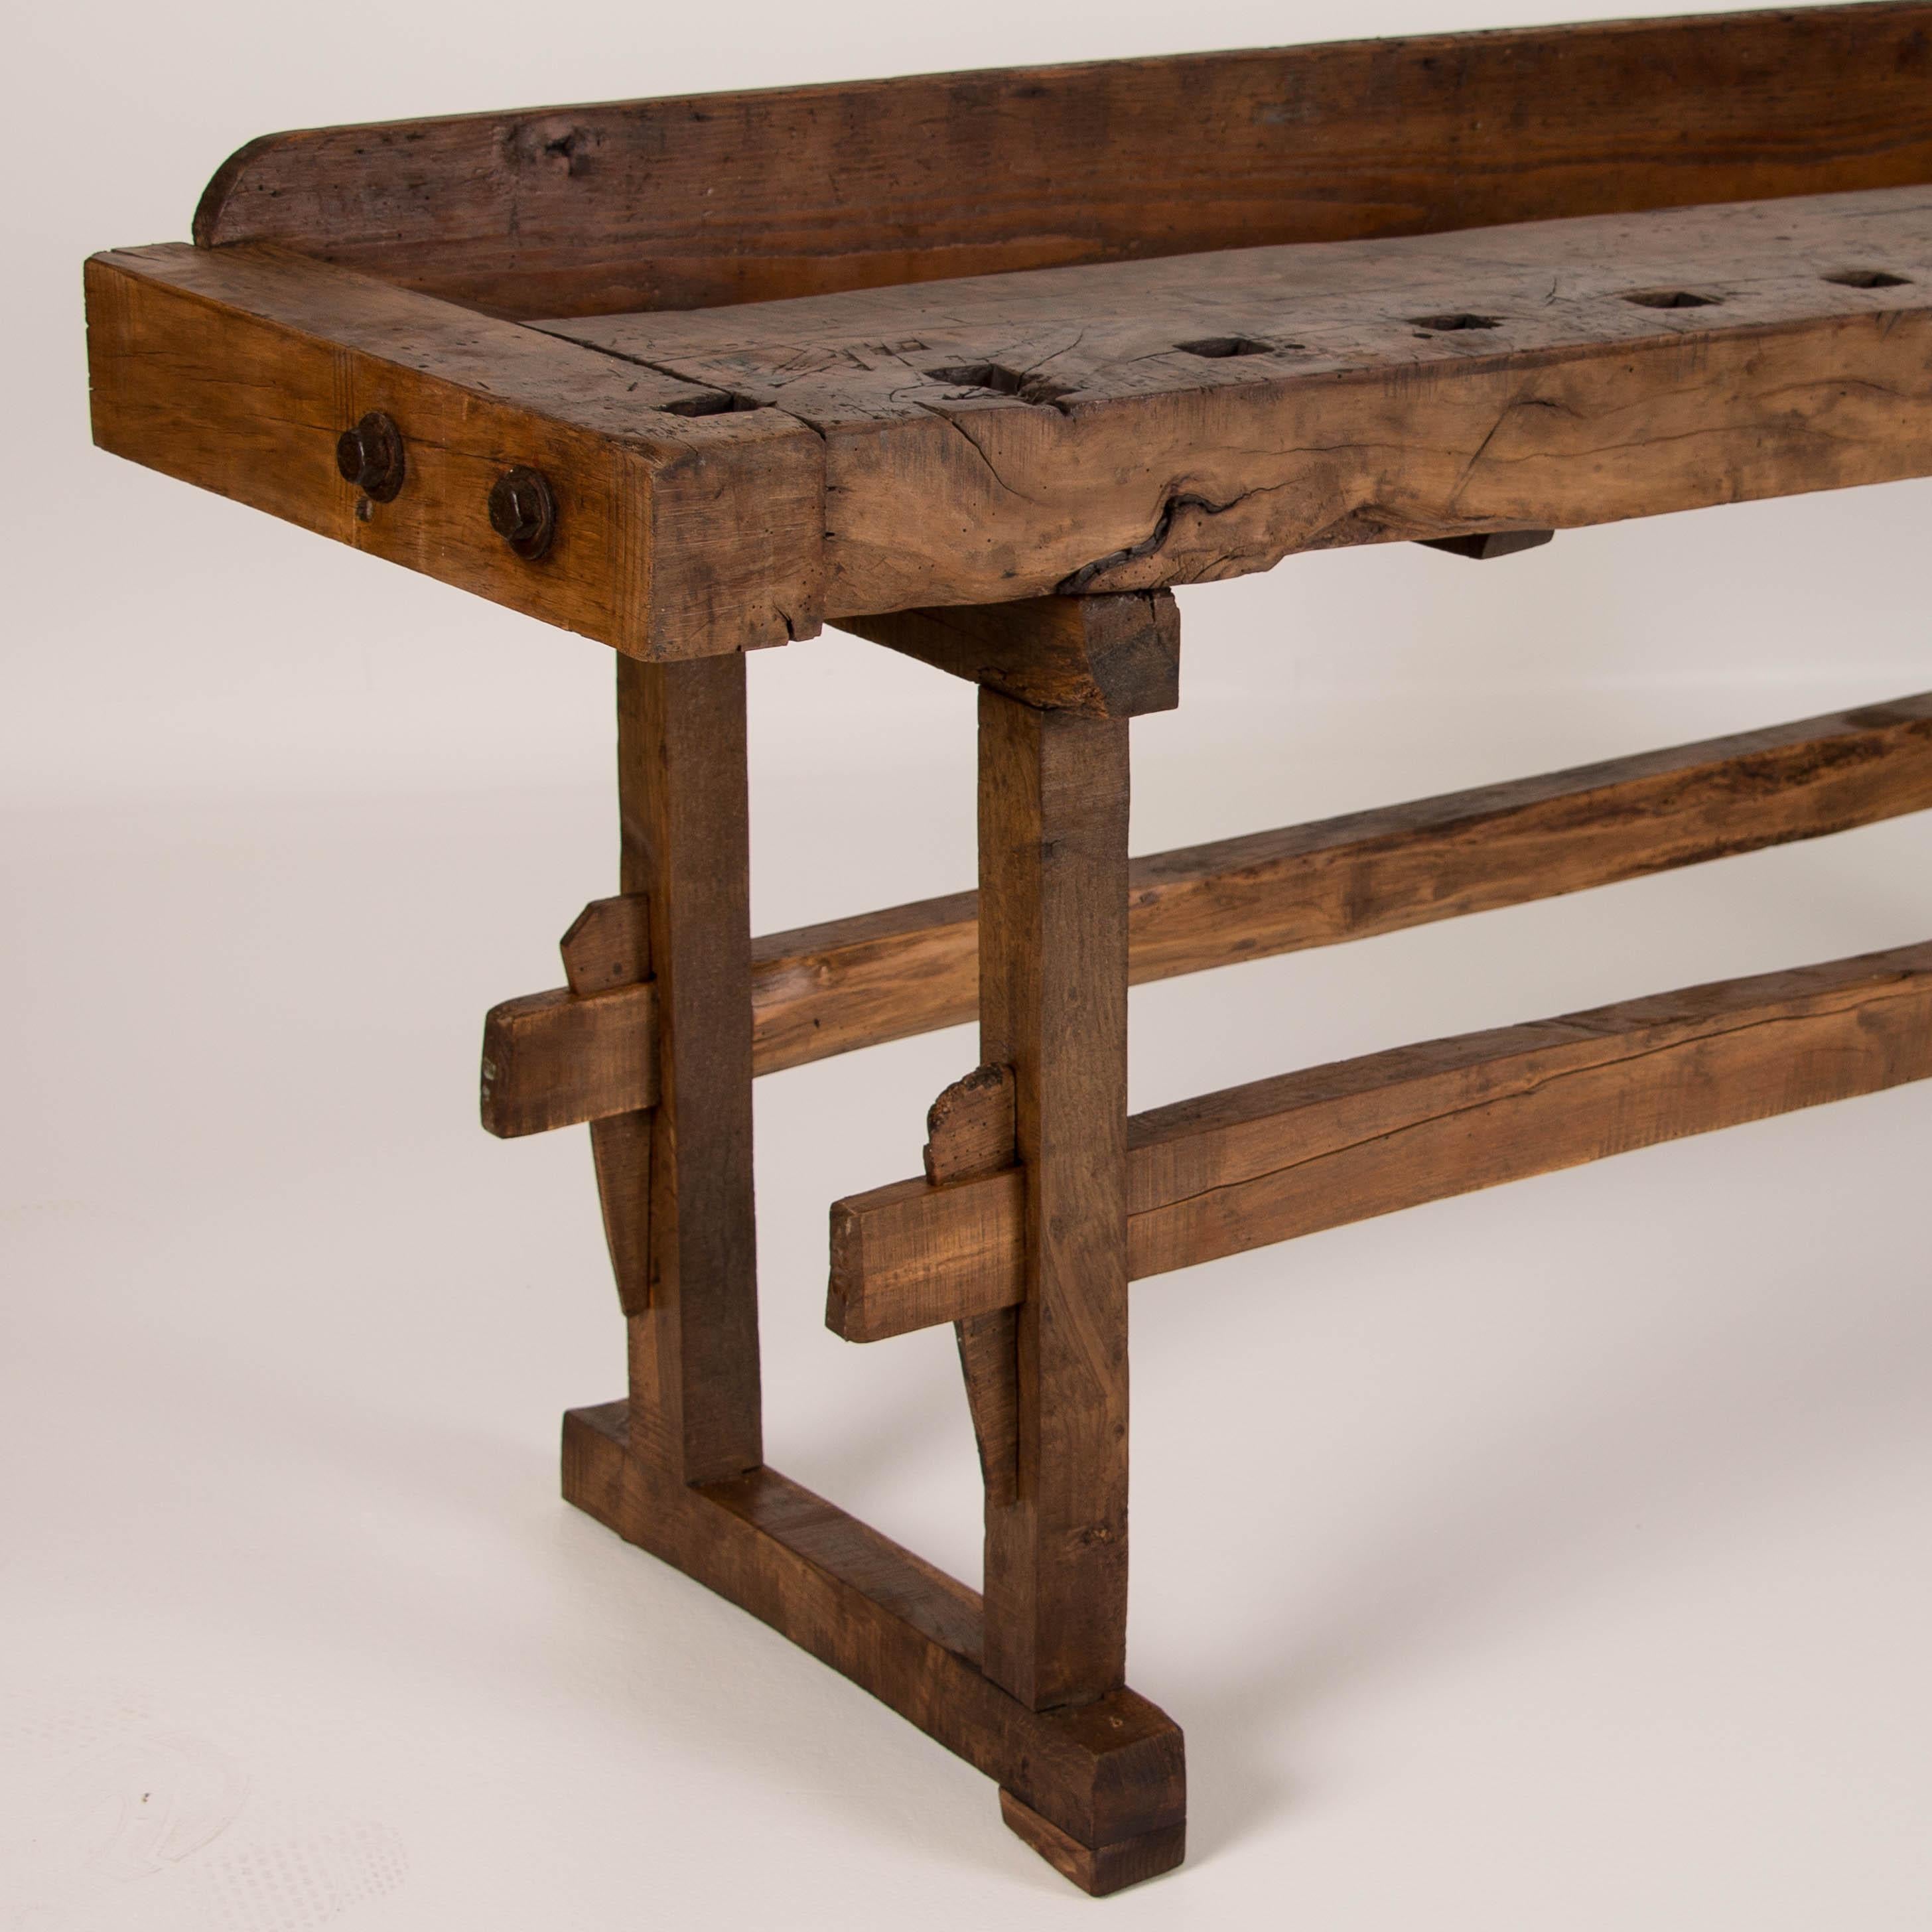 Hungarian Antique Carpenter's Workbench / Console Table